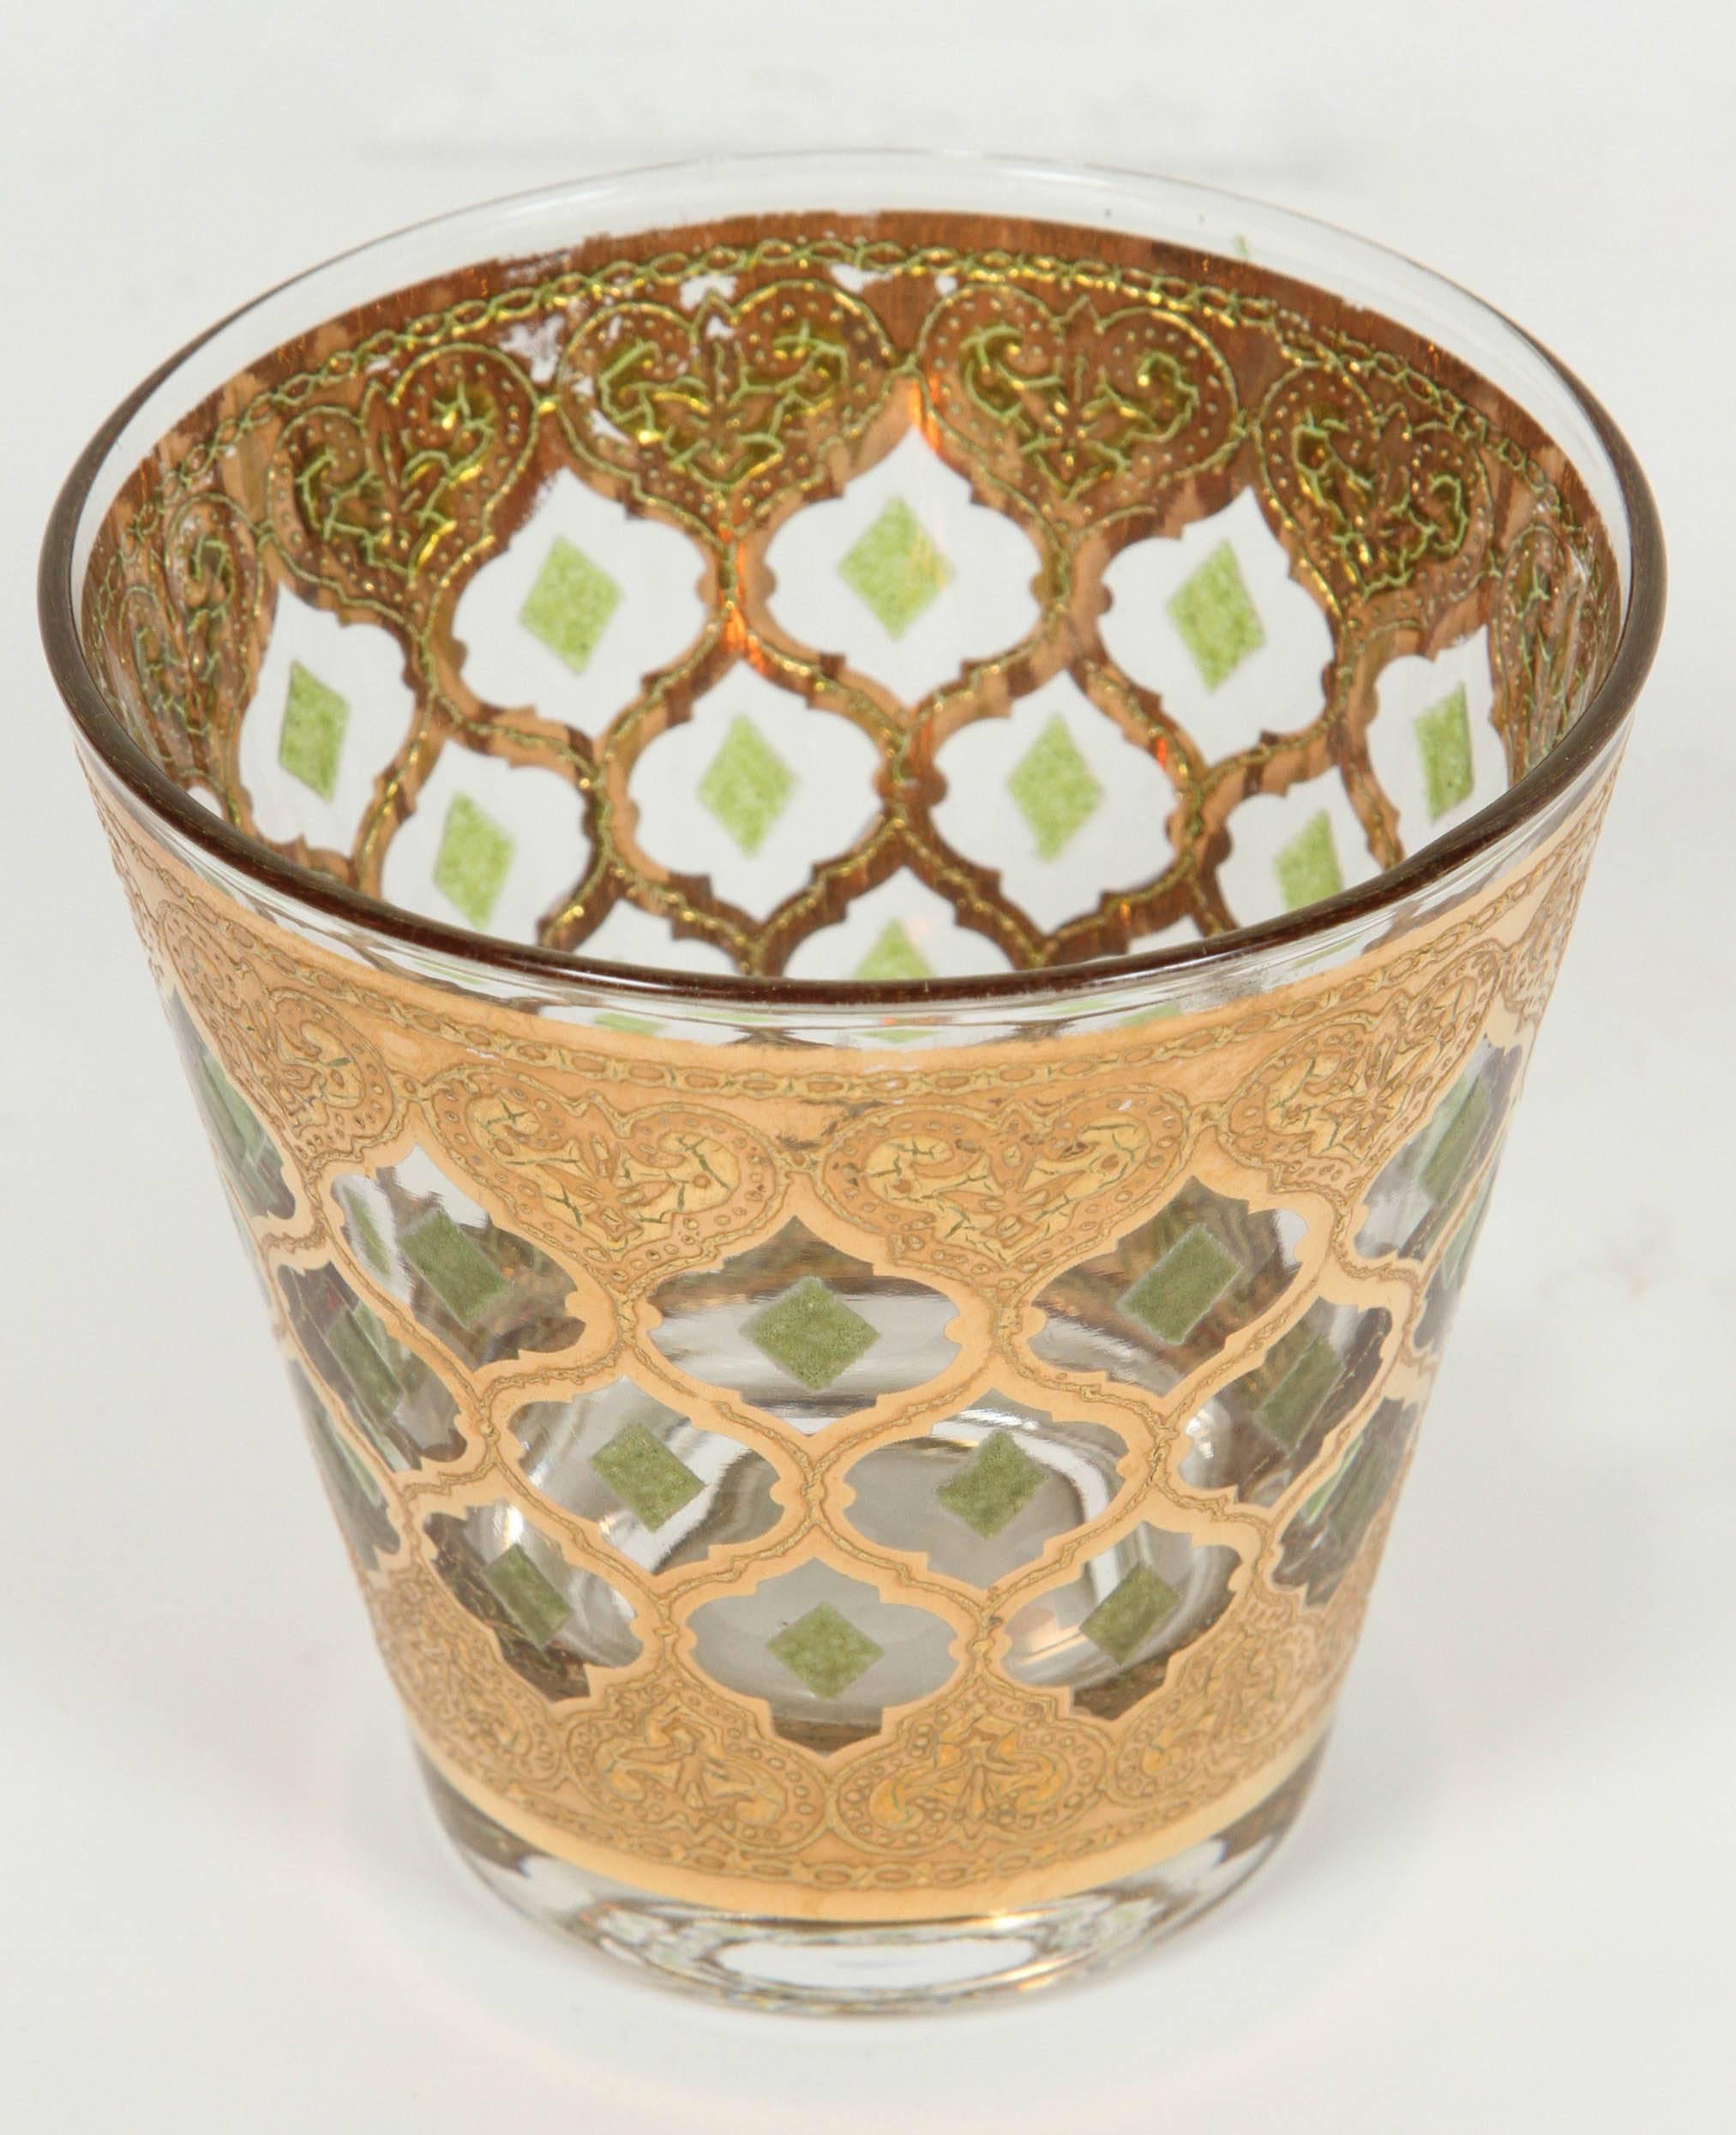 8 Mid-Century Vintage lowball rocks glasses from Culver with 22 Karat Gold in Valencia Moorish designs. 
Very elegant vintage barware glasses with a gold leaf finish.
 Size: 3.5